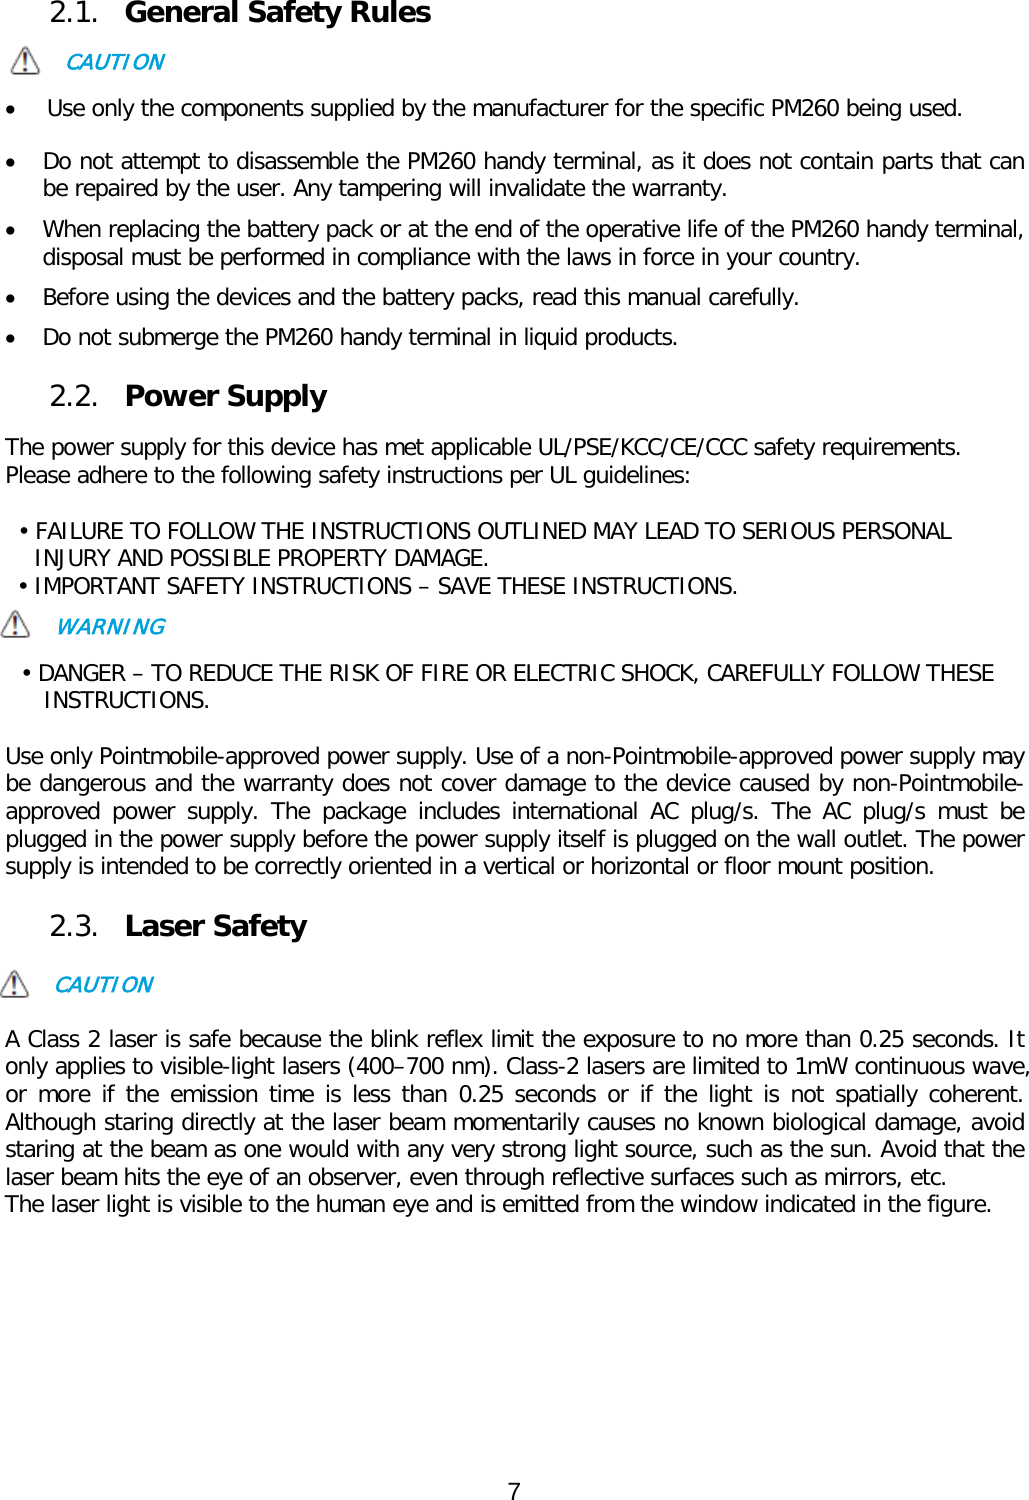  2.1. General Safety Rules  CAUTION  • Use only the components supplied by the manufacturer for the specific PM260 being used.  • Do not attempt to disassemble the PM260 handy terminal, as it does not contain parts that can be repaired by the user. Any tampering will invalidate the warranty. • When replacing the battery pack or at the end of the operative life of the PM260 handy terminal, disposal must be performed in compliance with the laws in force in your country.   • Before using the devices and the battery packs, read this manual carefully. • Do not submerge the PM260 handy terminal in liquid products.  2.2. Power Supply  The power supply for this device has met applicable UL/PSE/KCC/CE/CCC safety requirements.  Please adhere to the following safety instructions per UL guidelines:  • FAILURE TO FOLLOW THE INSTRUCTIONS OUTLINED MAY LEAD TO SERIOUS PERSONAL INJURY AND POSSIBLE PROPERTY DAMAGE.  • IMPORTANT SAFETY INSTRUCTIONS – SAVE THESE INSTRUCTIONS. WARNING  • DANGER – TO REDUCE THE RISK OF FIRE OR ELECTRIC SHOCK, CAREFULLY FOLLOW THESE INSTRUCTIONS.   Use only Pointmobile-approved power supply. Use of a non-Pointmobile-approved power supply may be dangerous and the warranty does not cover damage to the device caused by non-Pointmobile-approved power supply. The package includes international  AC  plug/s. The  AC plug/s must be plugged in the power supply before the power supply itself is plugged on the wall outlet. The power supply is intended to be correctly oriented in a vertical or horizontal or floor mount position.   2.3. Laser Safety  CAUTION  A Class 2 laser is safe because the blink reflex limit the exposure to no more than 0.25 seconds. It only applies to visible-light lasers (400–700 nm). Class-2 lasers are limited to 1mW continuous wave, or more if the emission time is less than 0.25 seconds or if the light is not spatially coherent. Although staring directly at the laser beam momentarily causes no known biological damage, avoid staring at the beam as one would with any very strong light source, such as the sun. Avoid that the laser beam hits the eye of an observer, even through reflective surfaces such as mirrors, etc. The laser light is visible to the human eye and is emitted from the window indicated in the figure.             7  